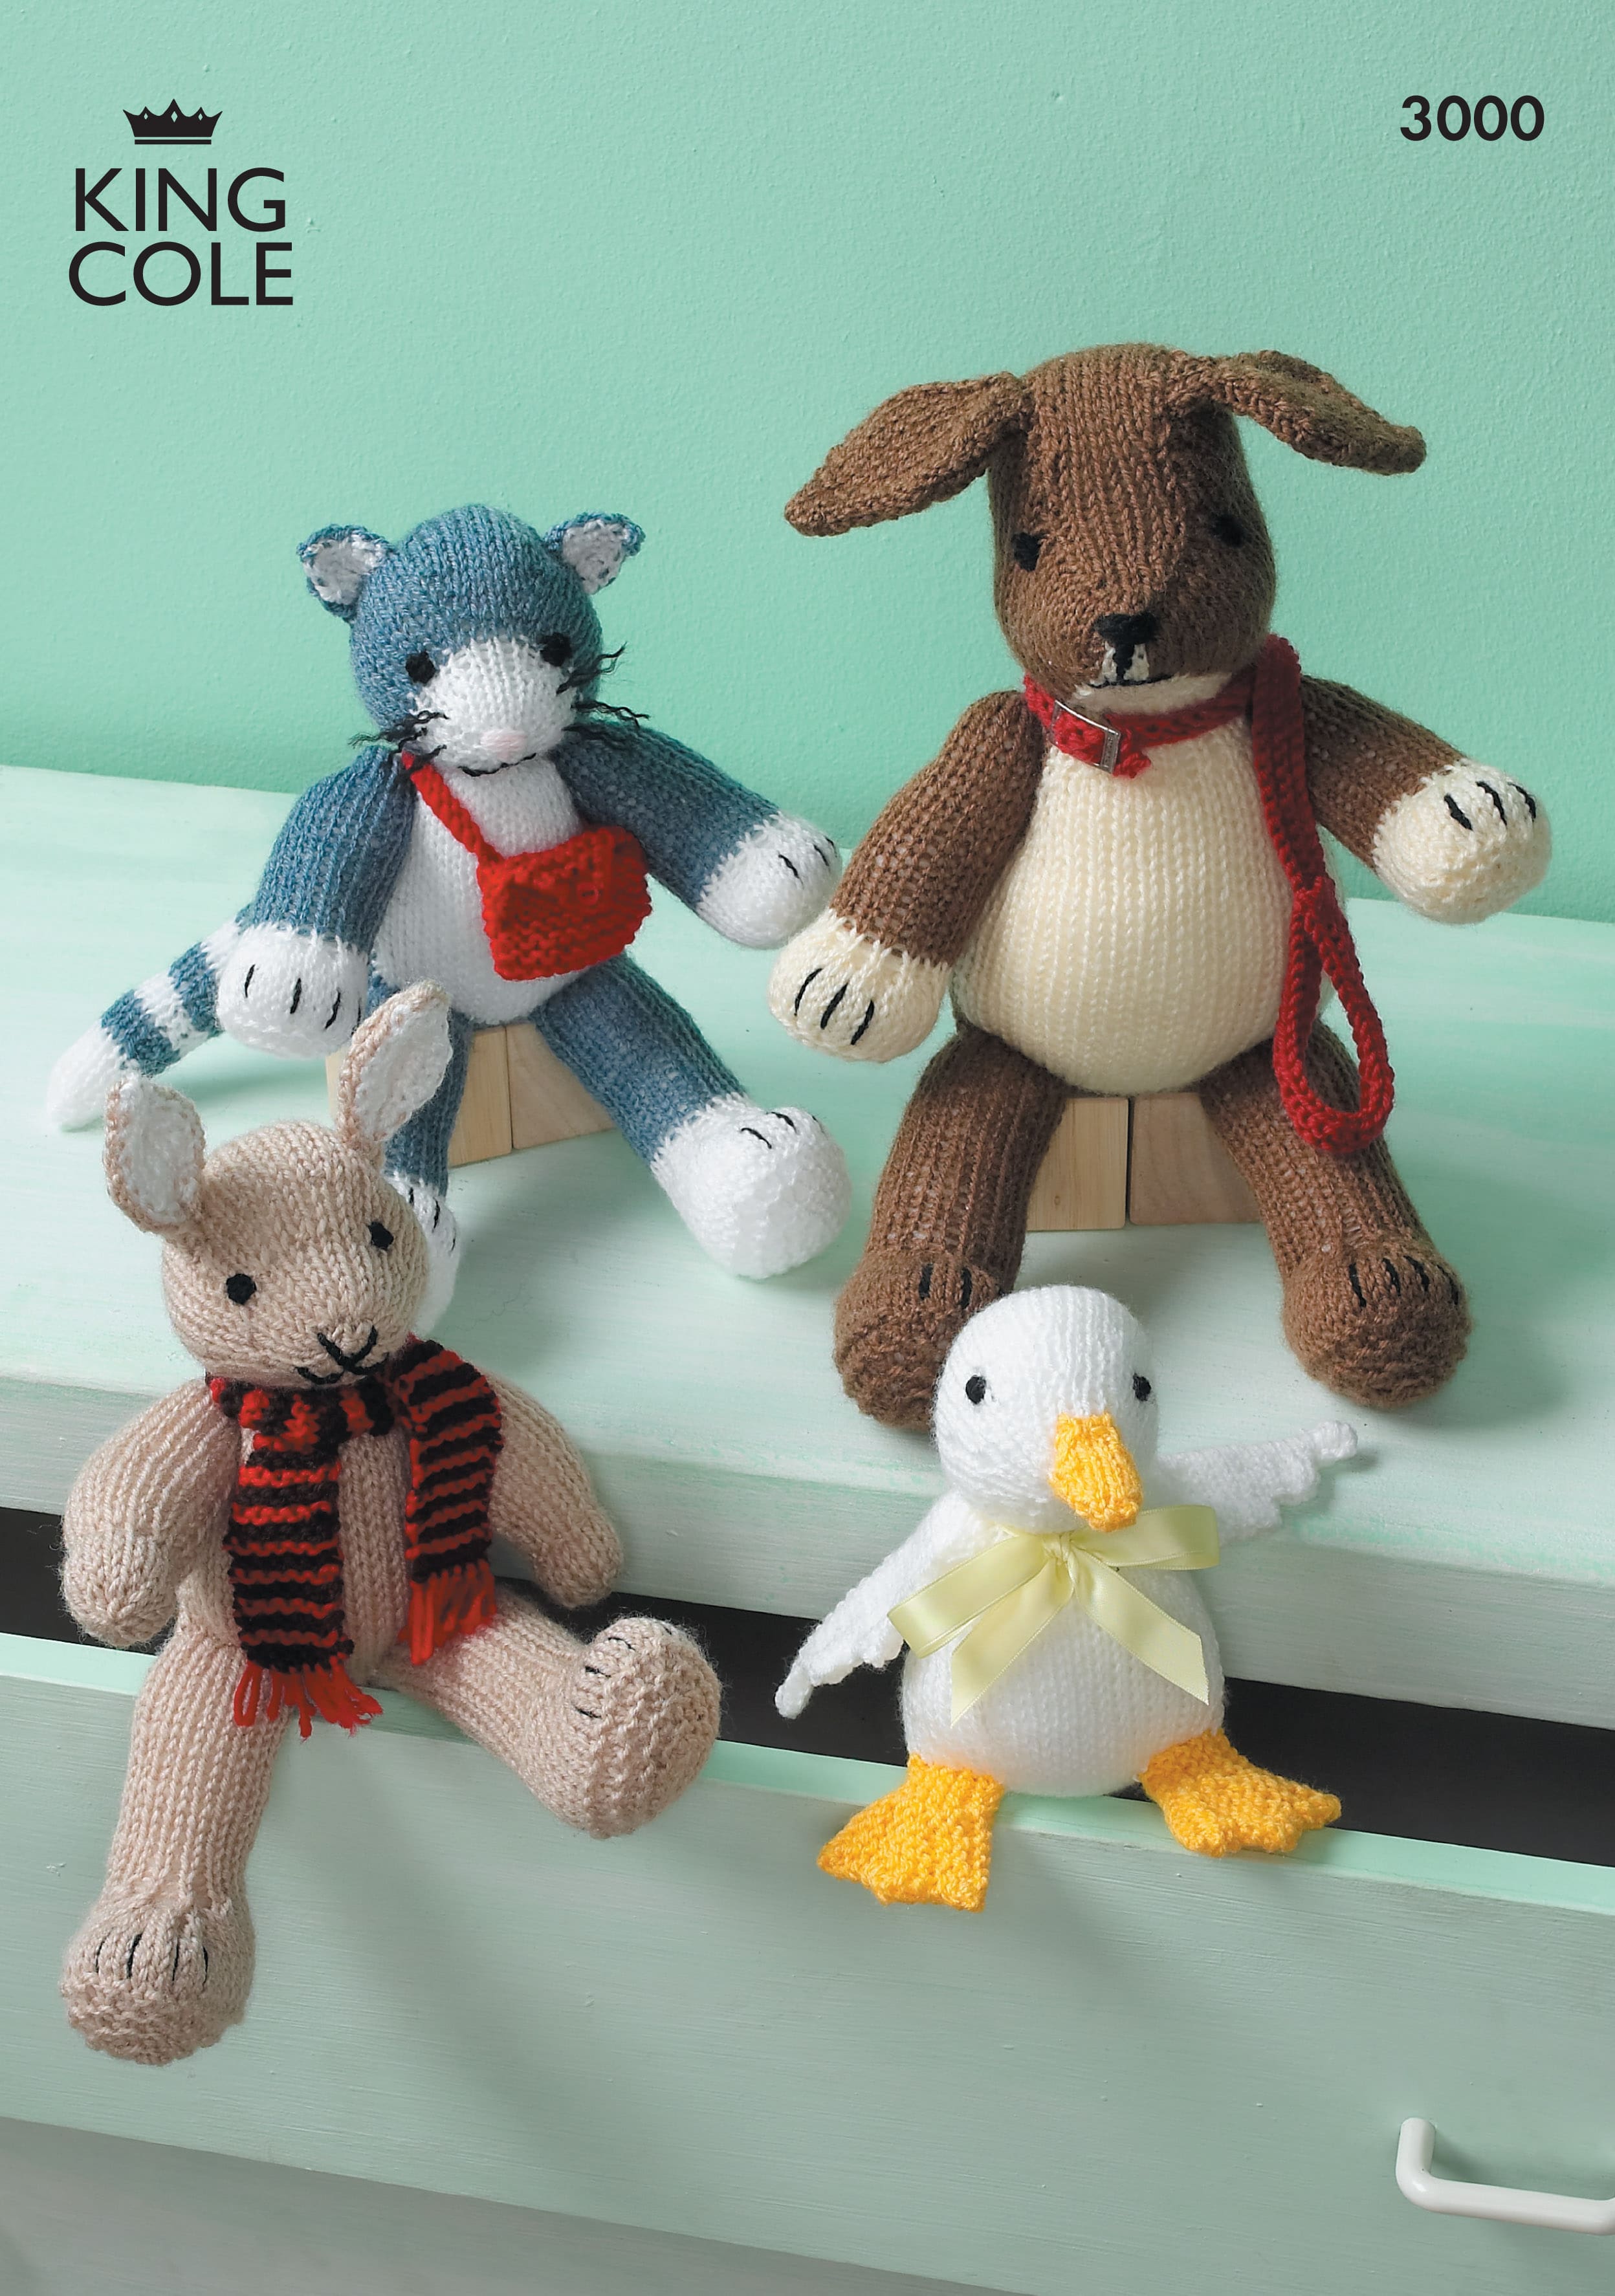 Easy to Follow Toys Knitted in Various King Cole DK Knitting Patterns